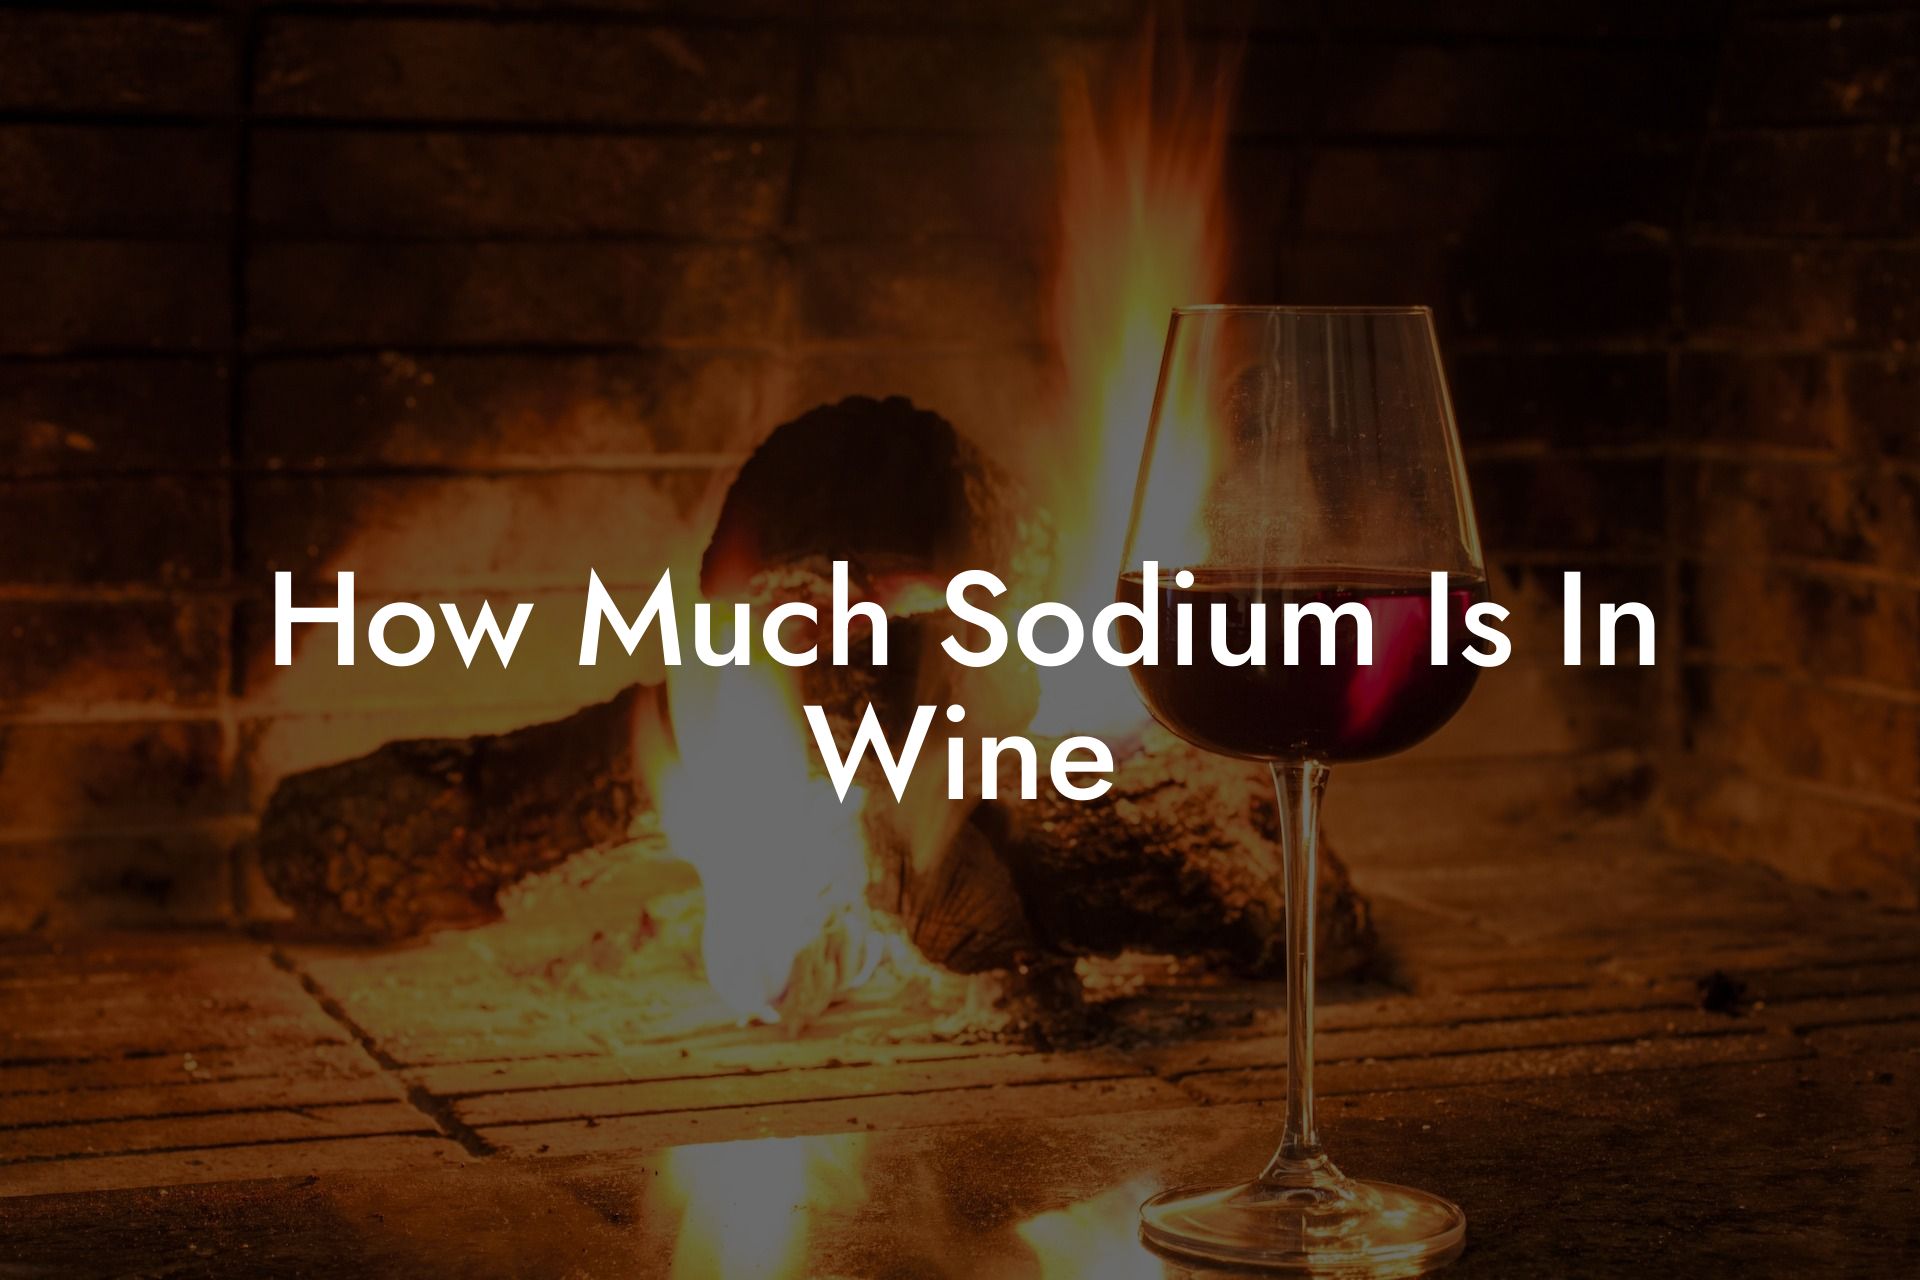 How Much Sodium Is In Wine